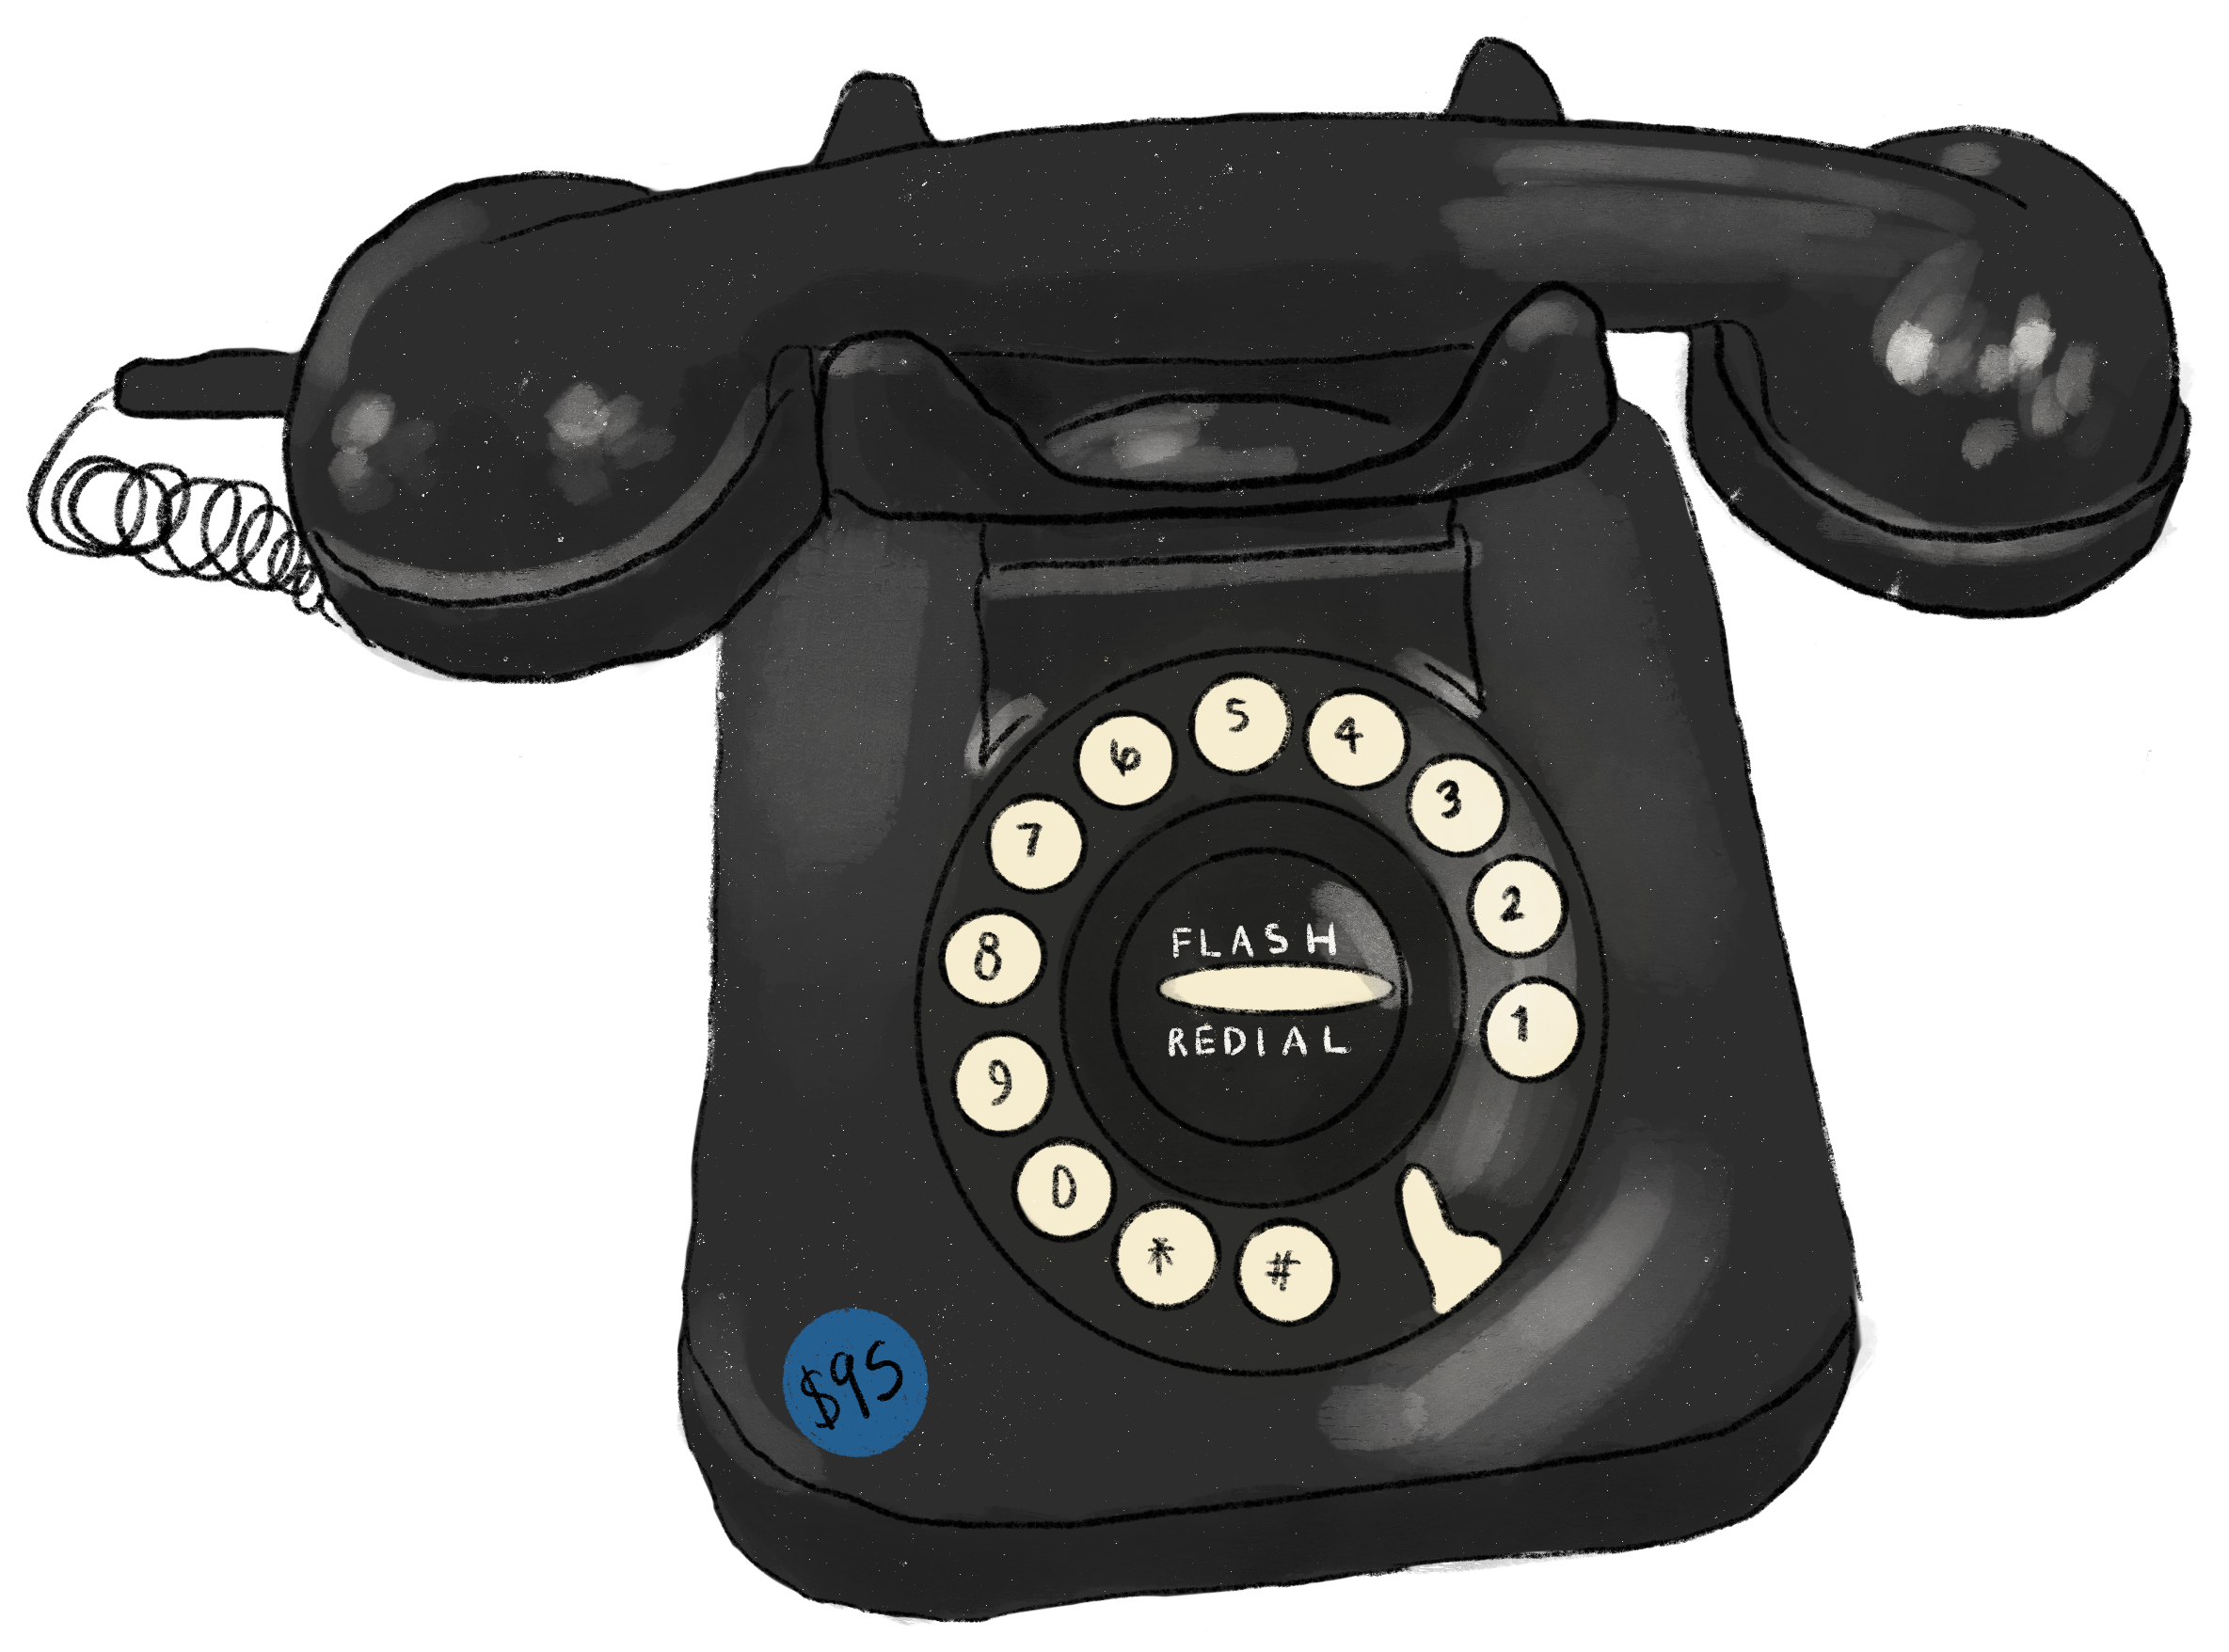 An illustration of a black rotary phone